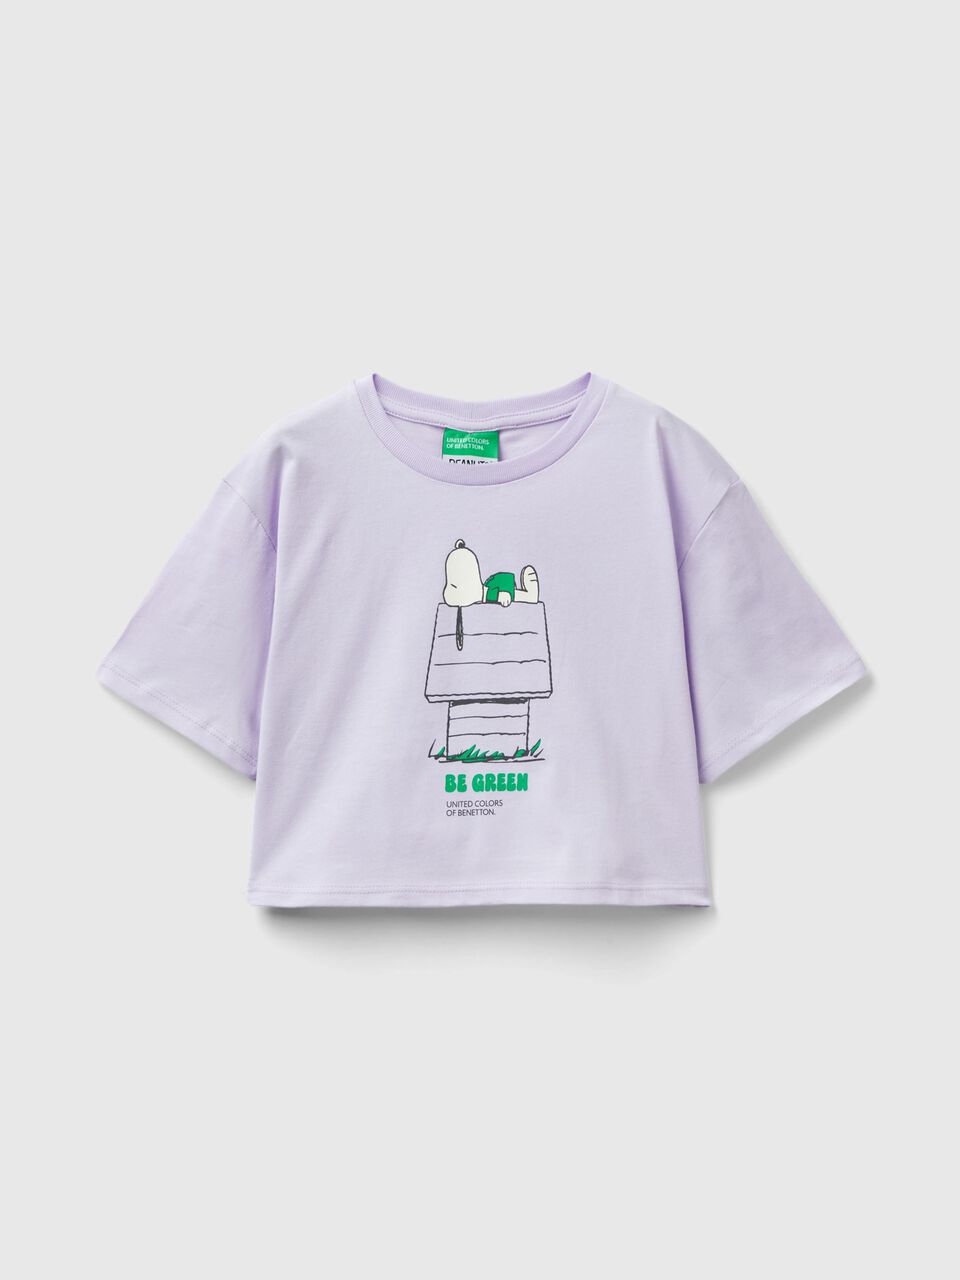 Cropped ©Peanuts t-shirt - Lilac | Benetton